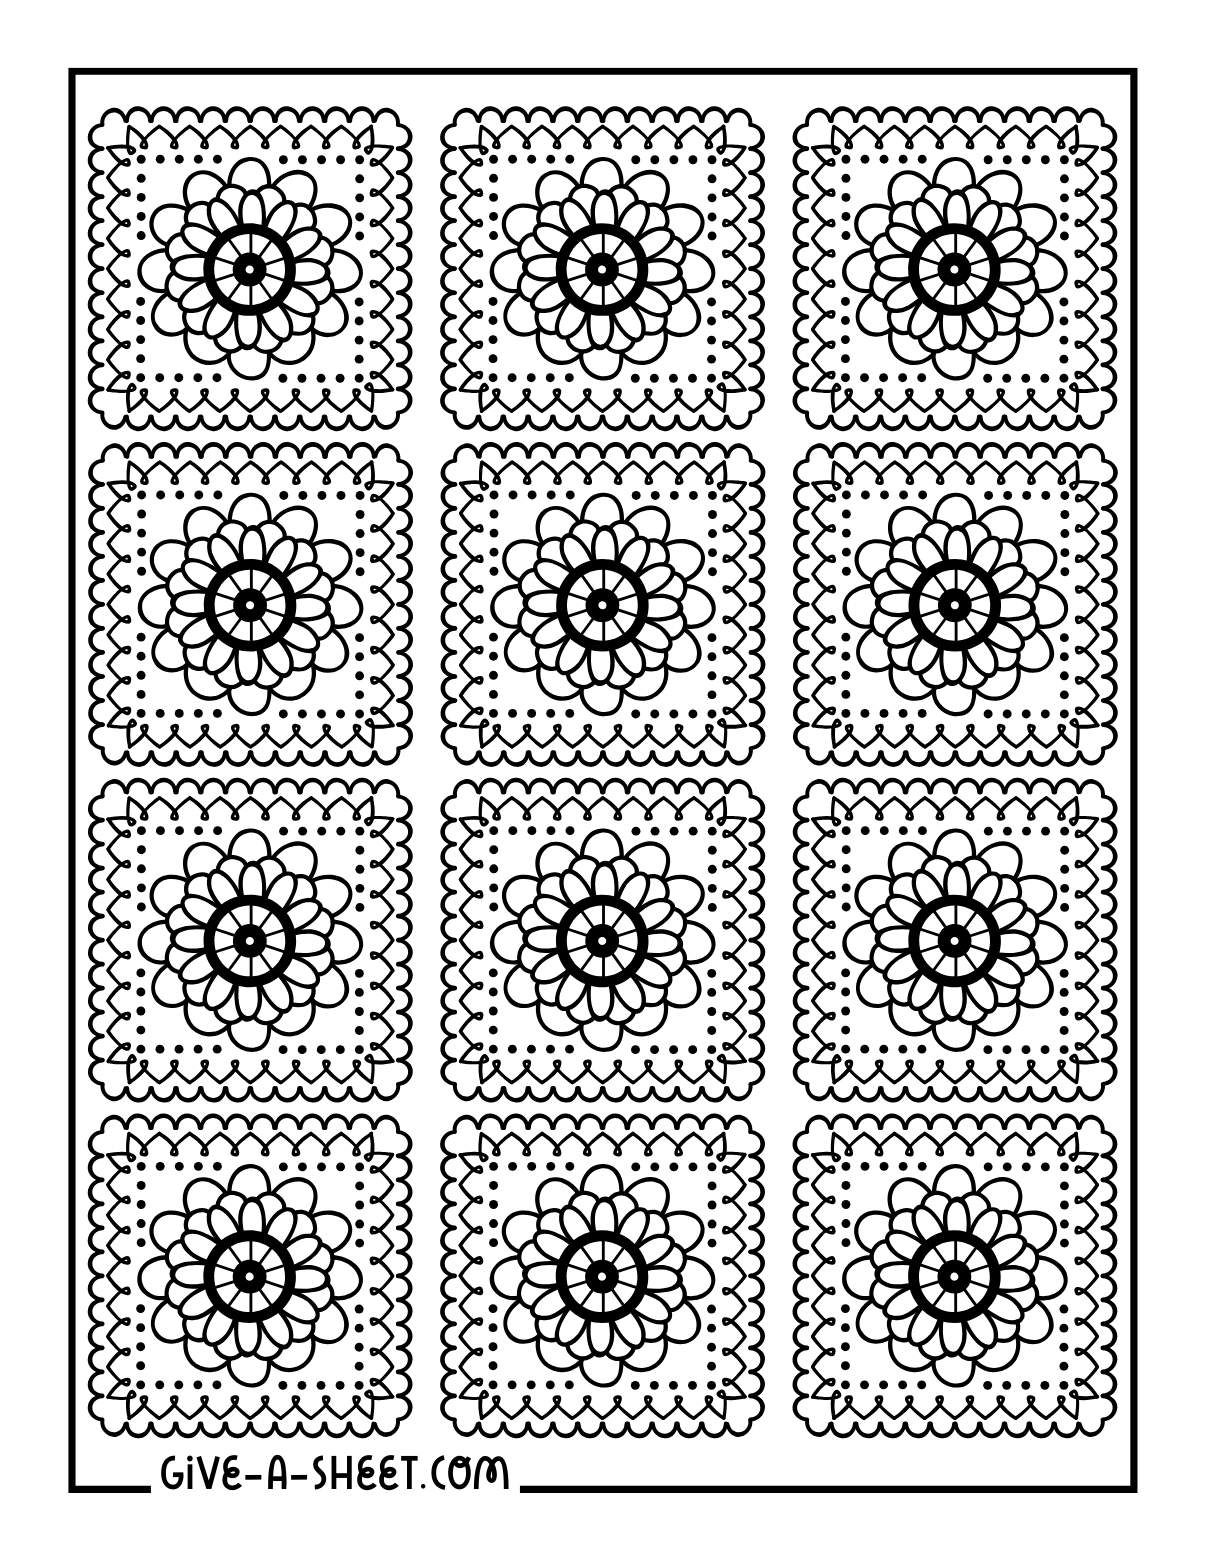 Crochet granny square patterns coloring page.